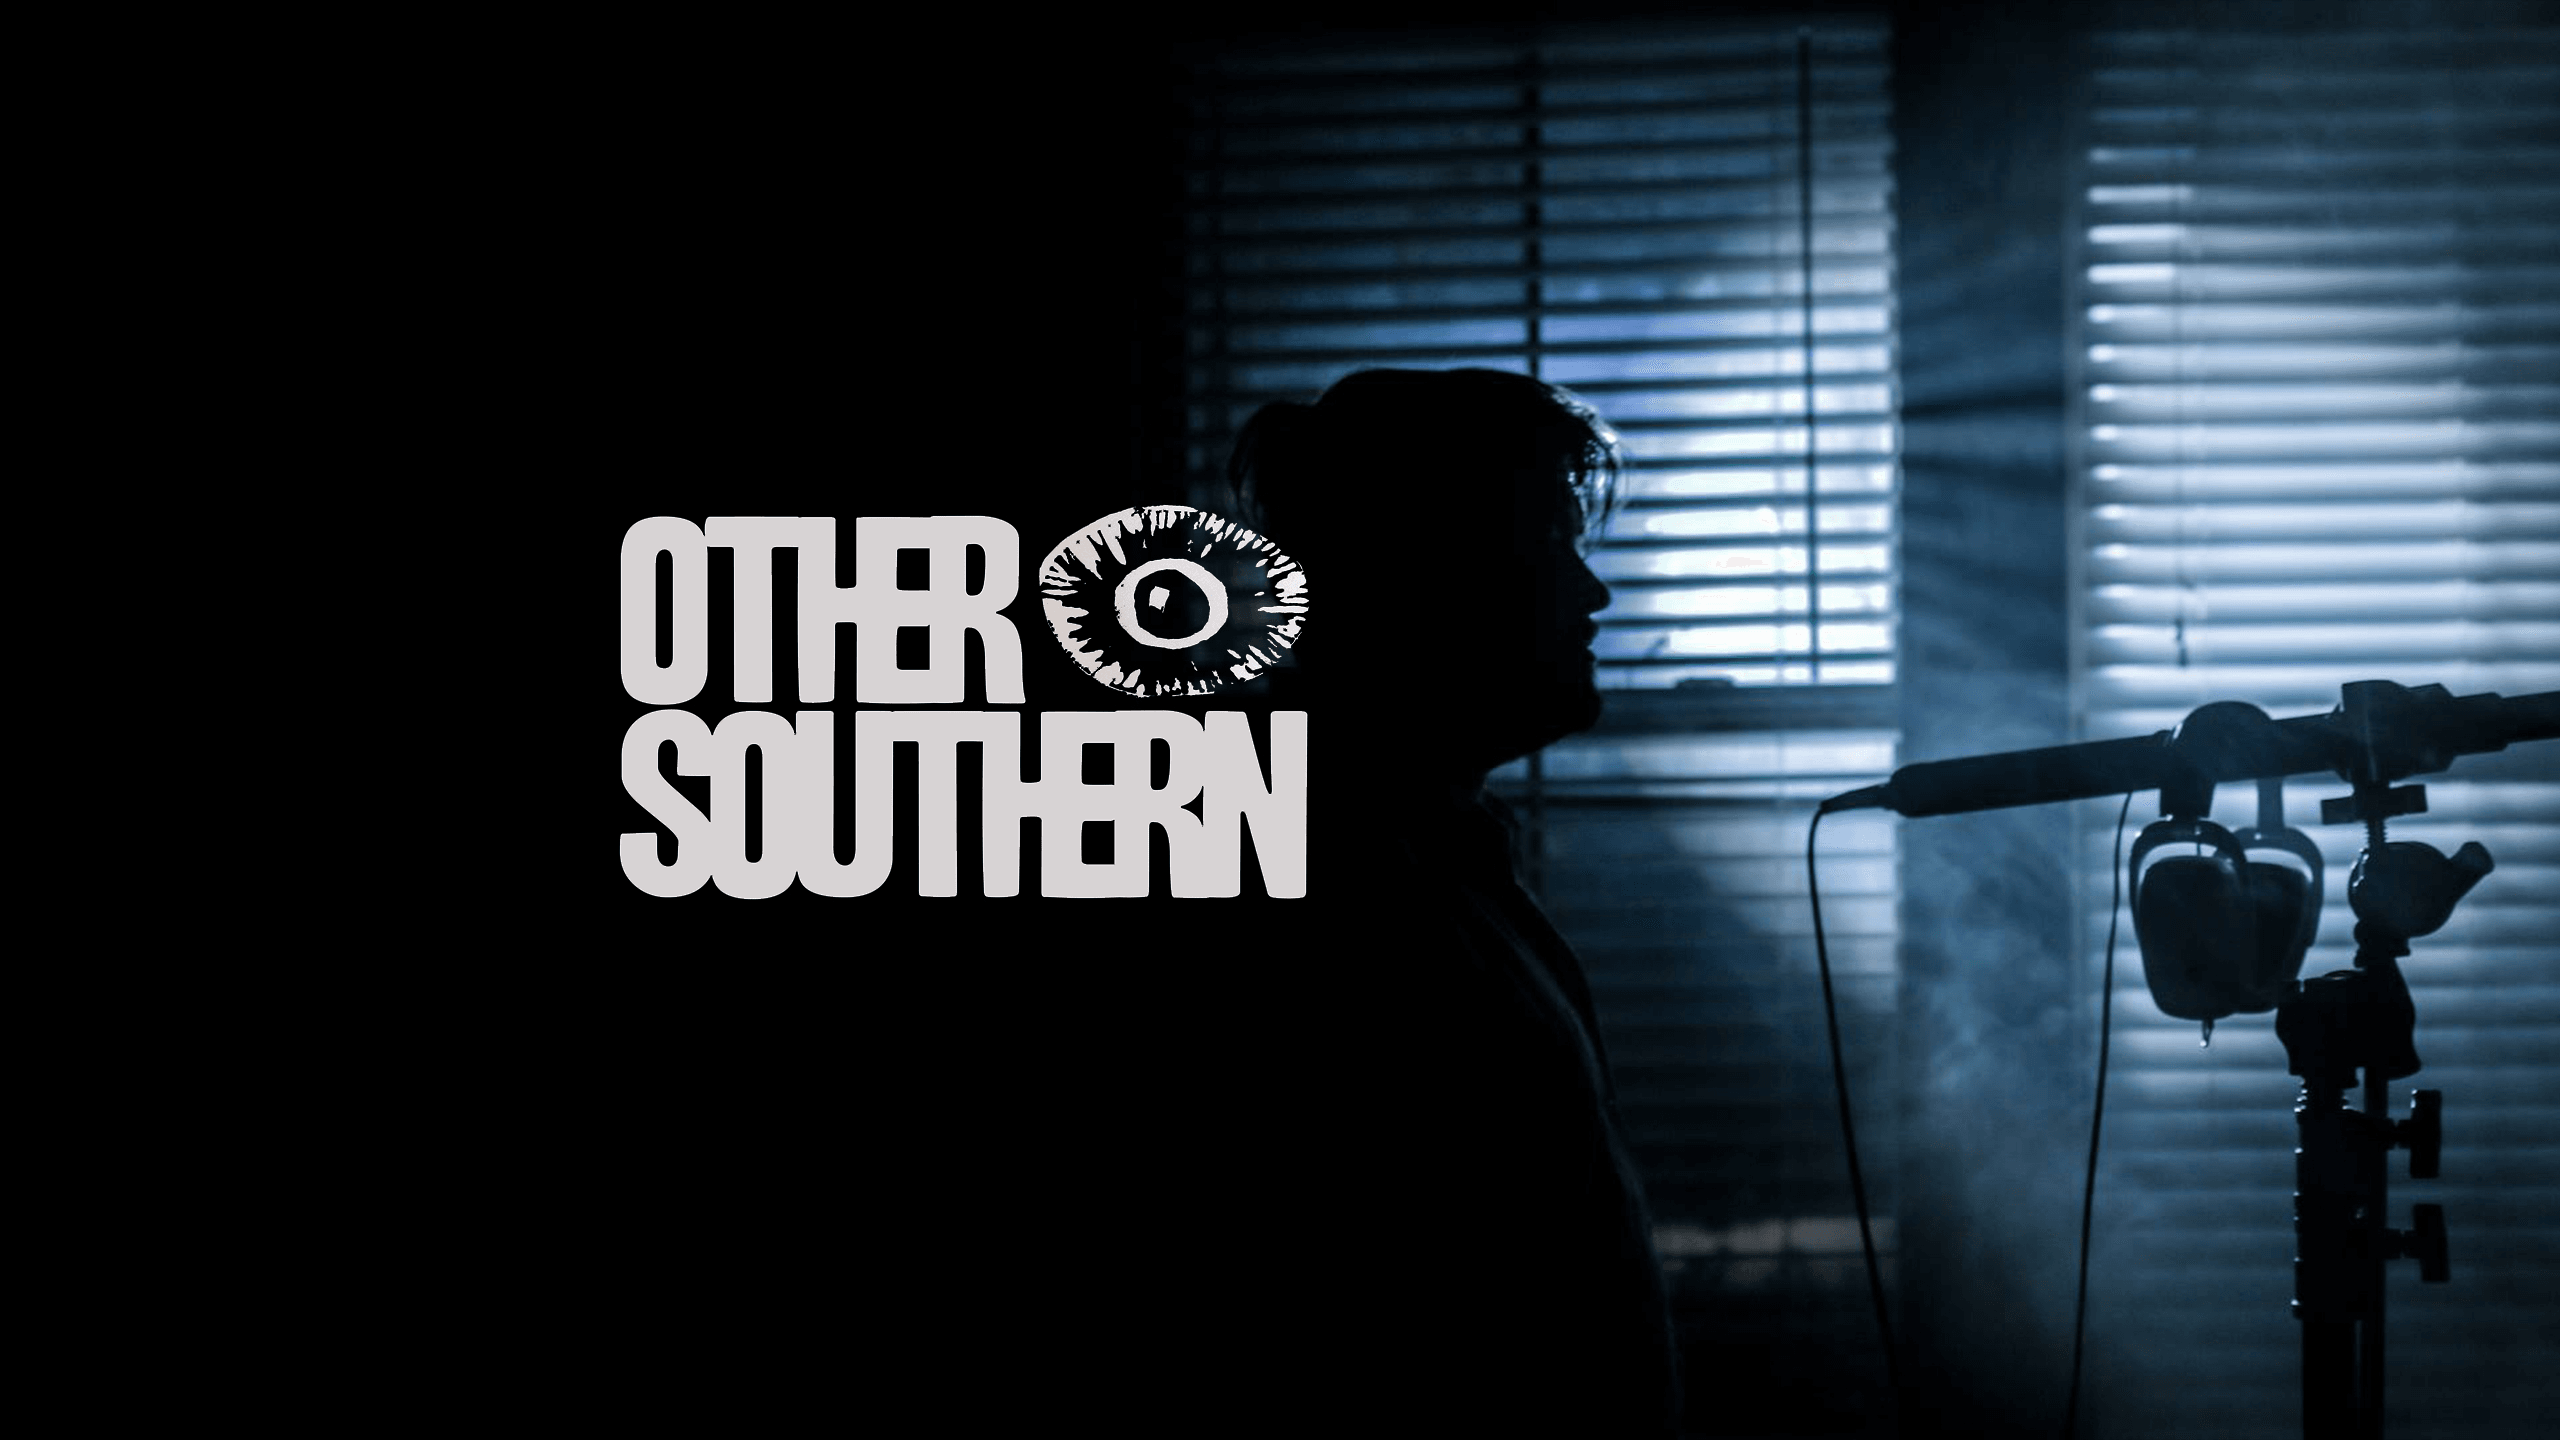 OtherSouthern 橫幅